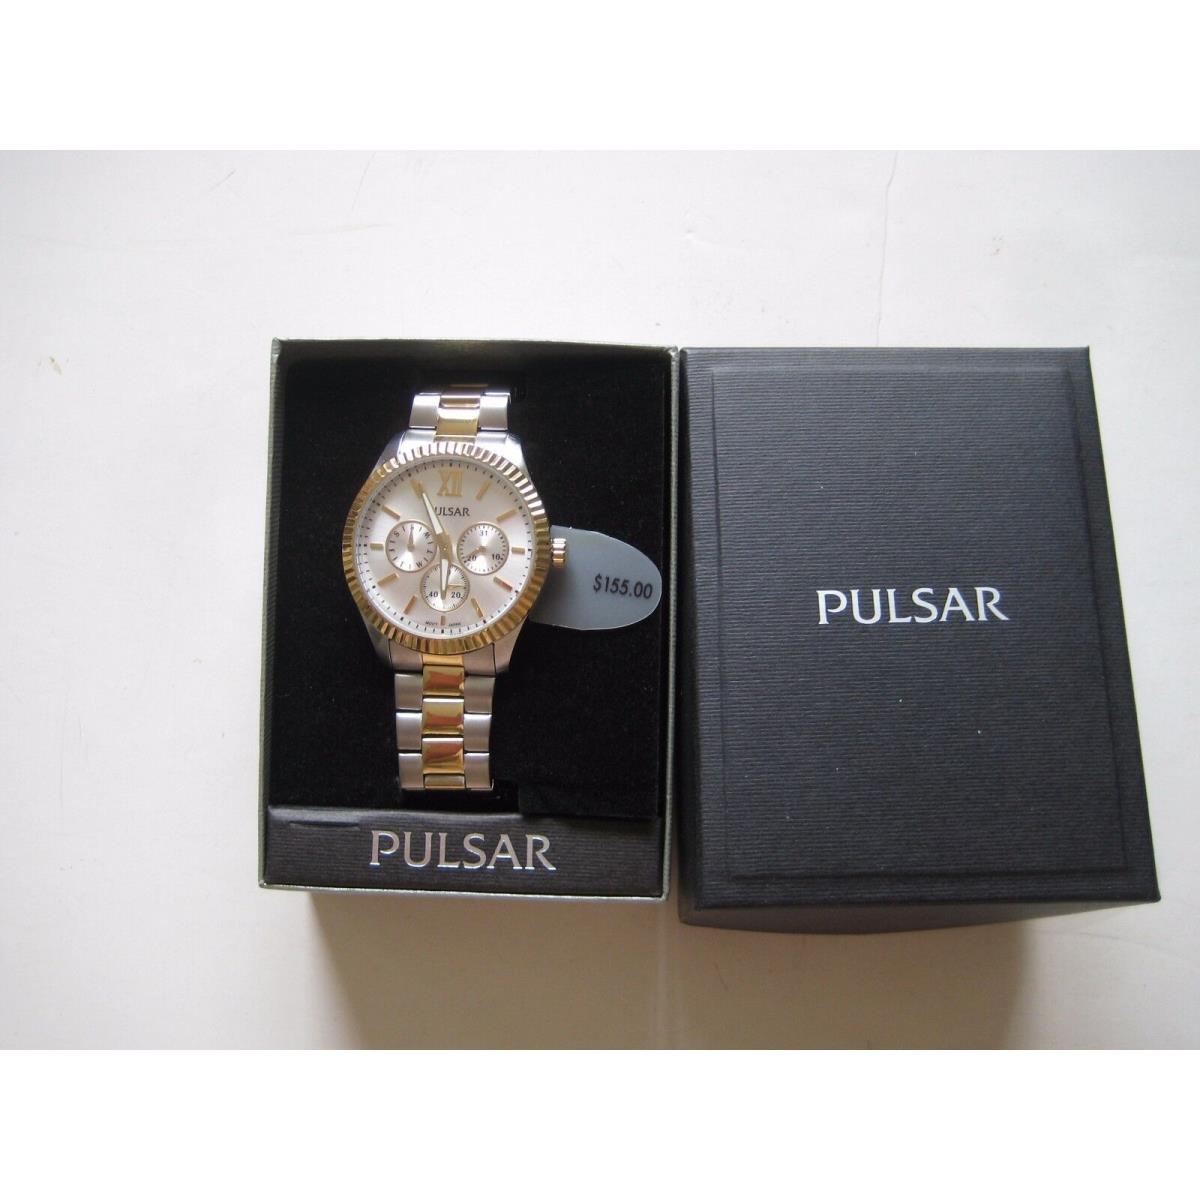 Pulsar Chronograph Two Tone Watch - PP6 142 - Retail